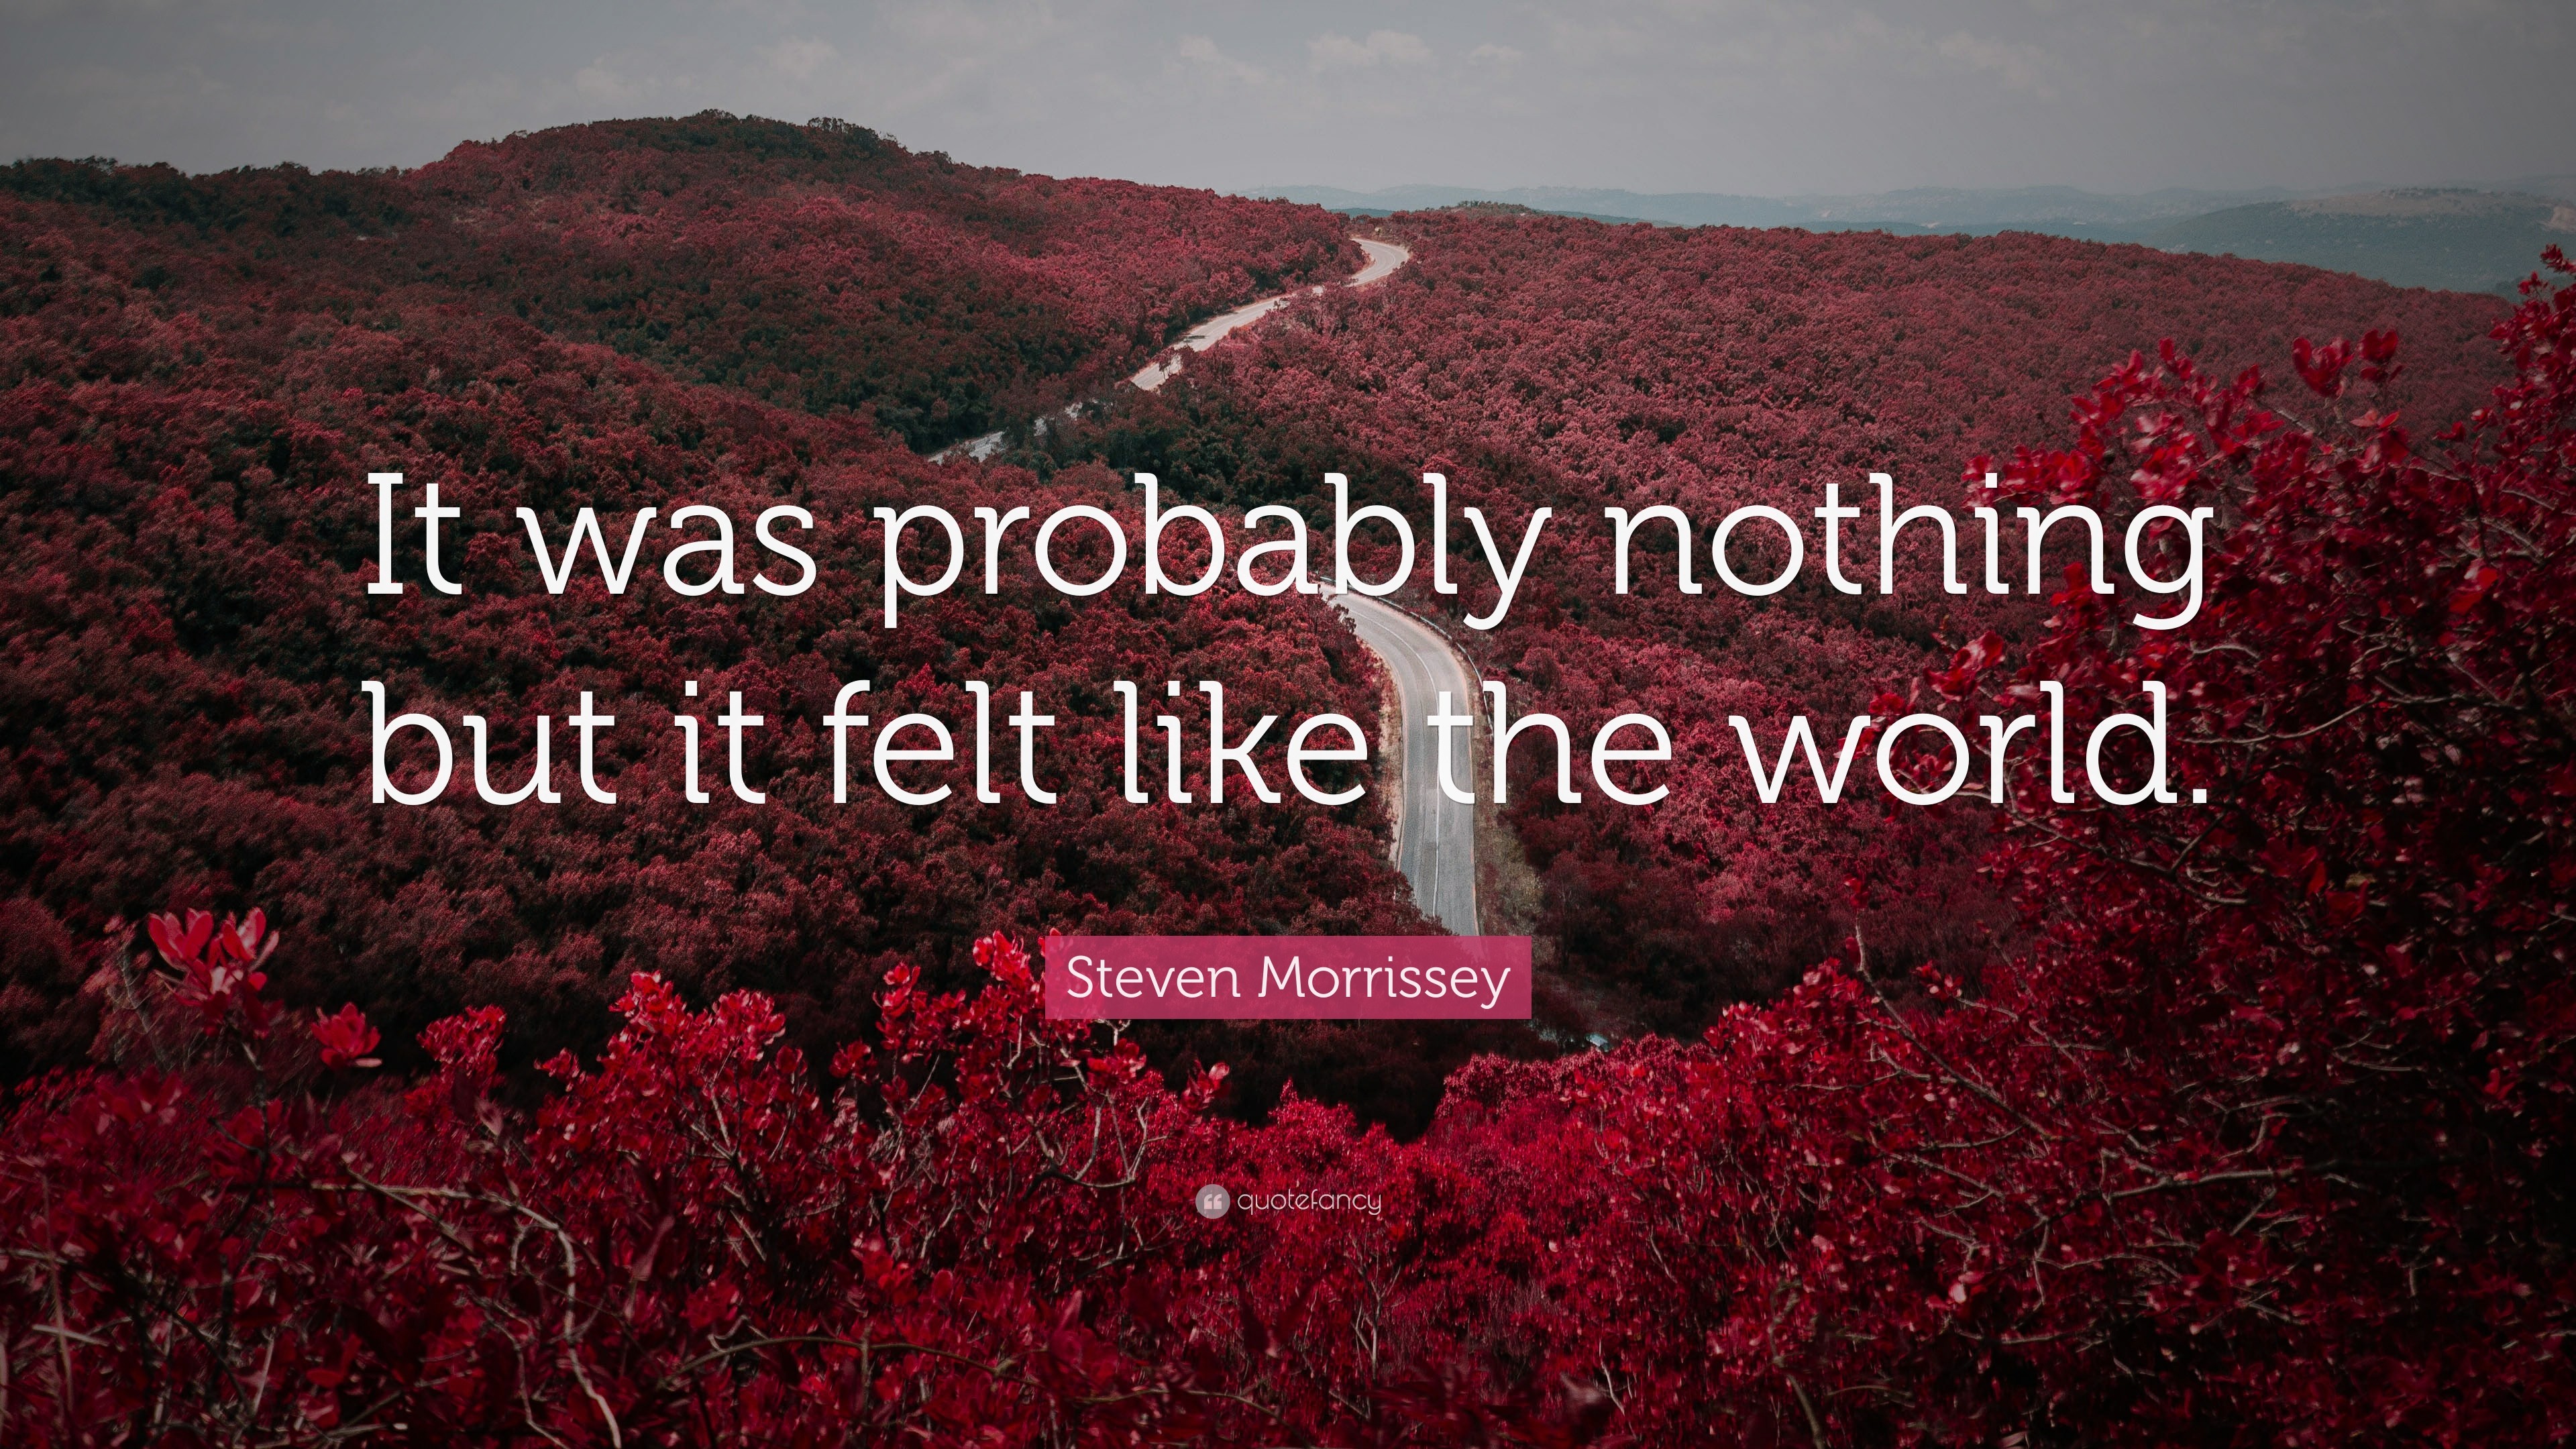 3840x2160 Steven Morrissey Quote: “It was probably nothing but it felt like the world.